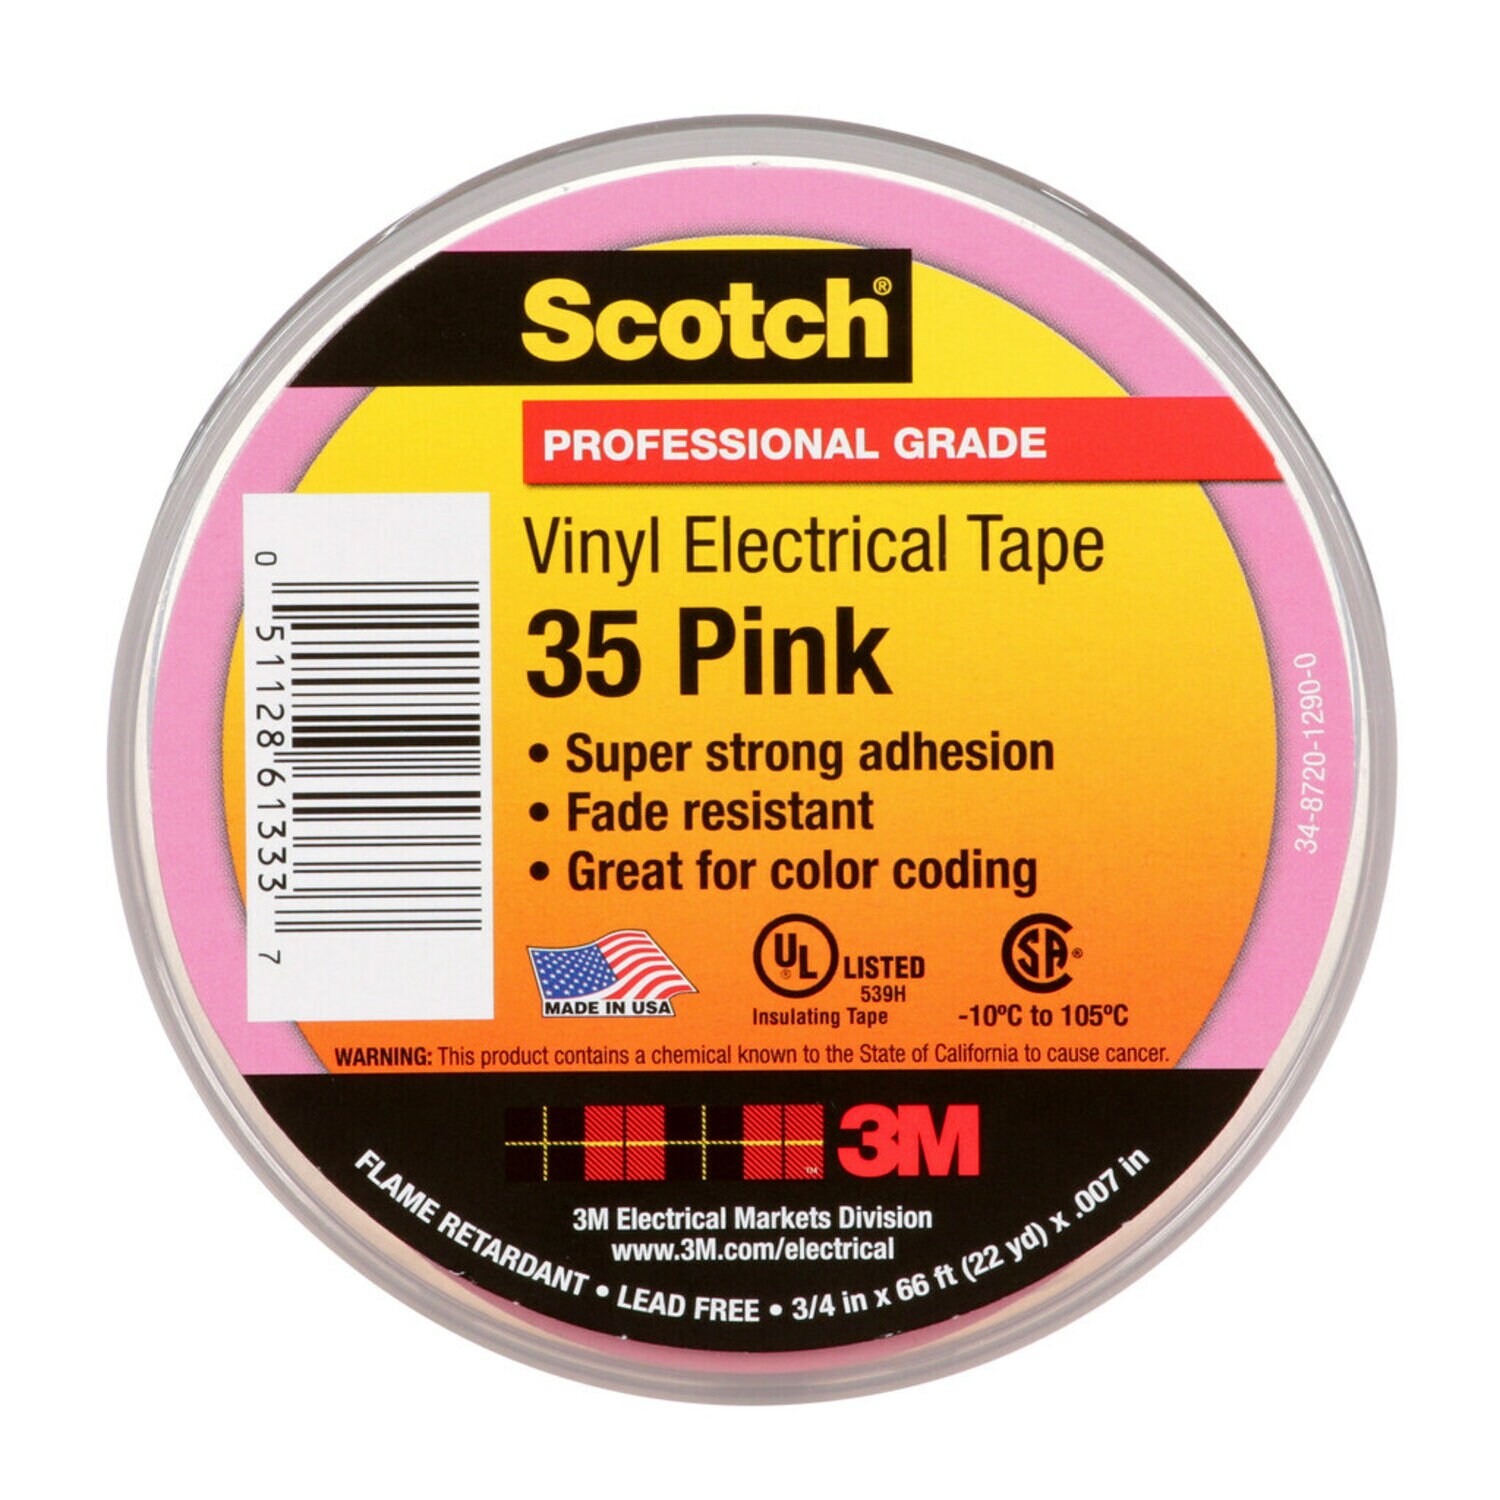 7010411602 - Scotch Vinyl Color Coding Electrical Tape 35, 3/4 in x 66 ft, Pink, 10
rolls/carton, 100 rolls/Case